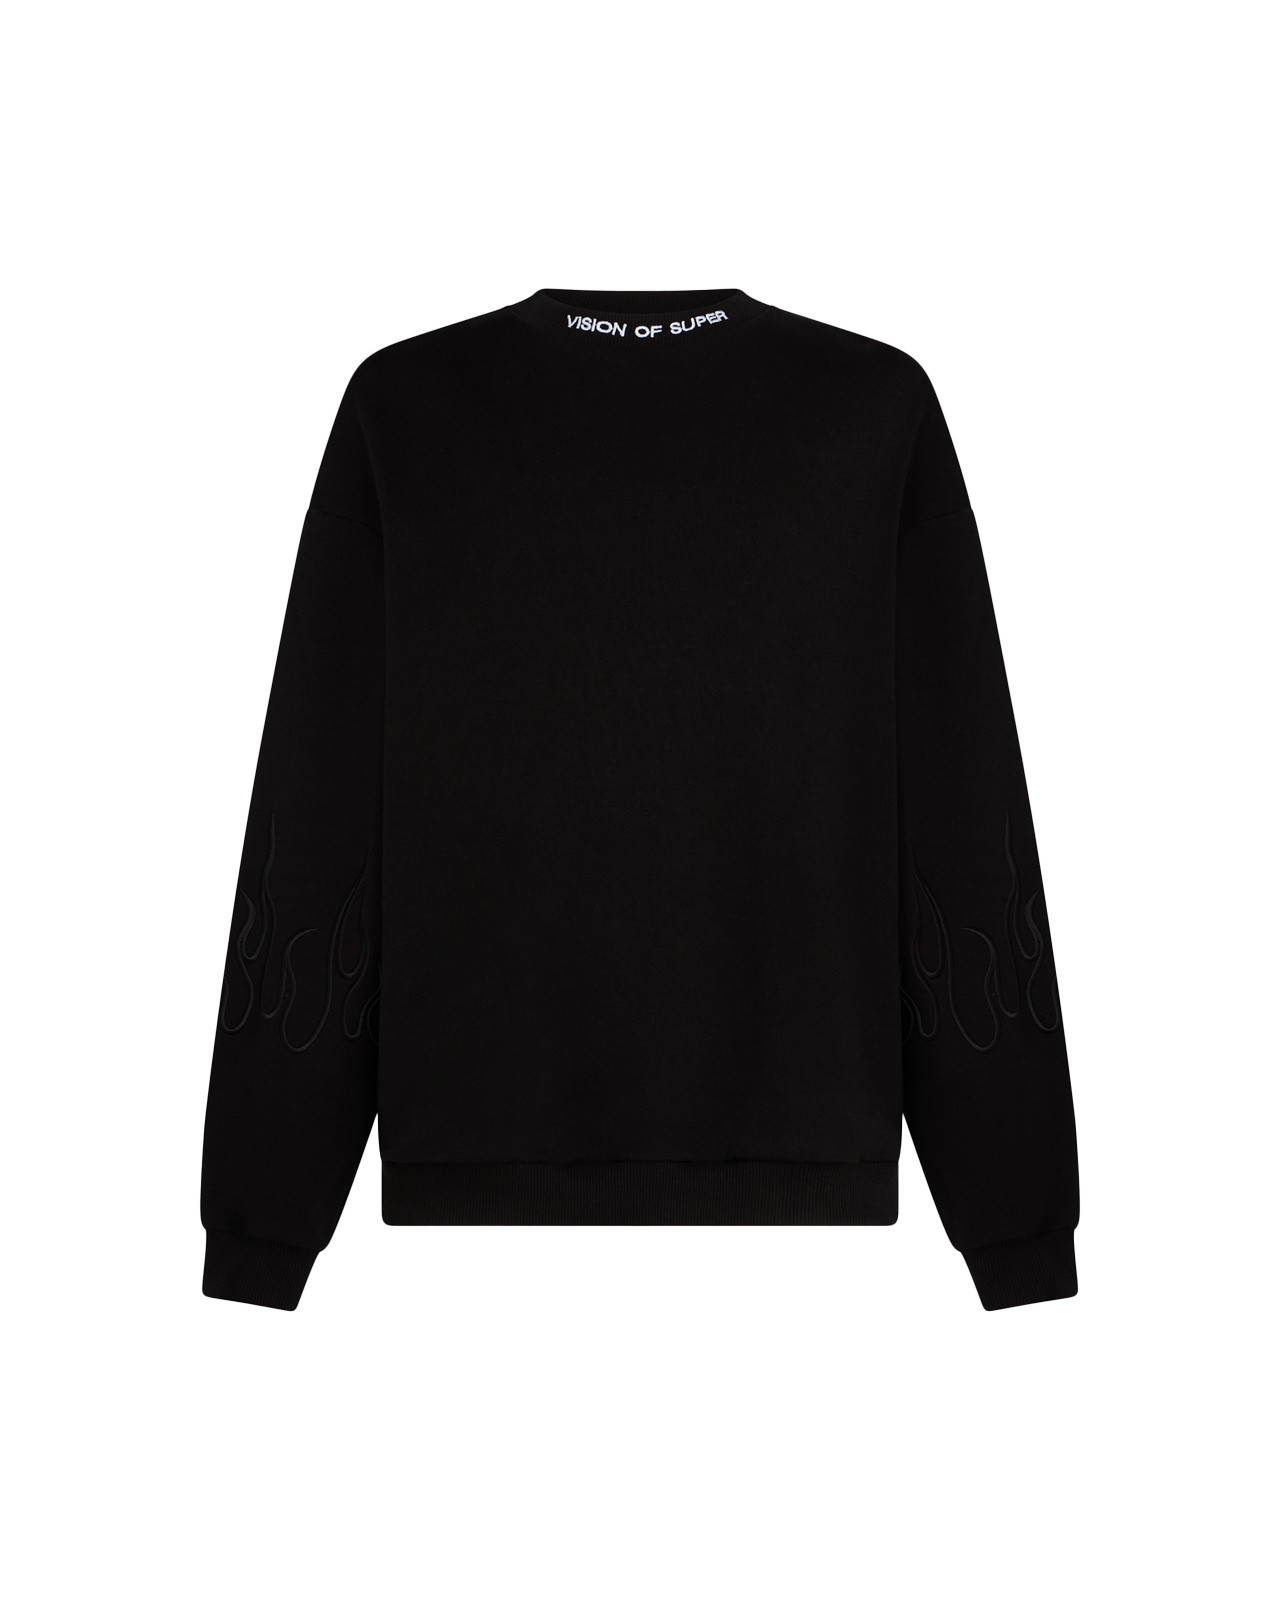 Vision of Super - Sweatshirt with embroidered flames, Black, large image number 0